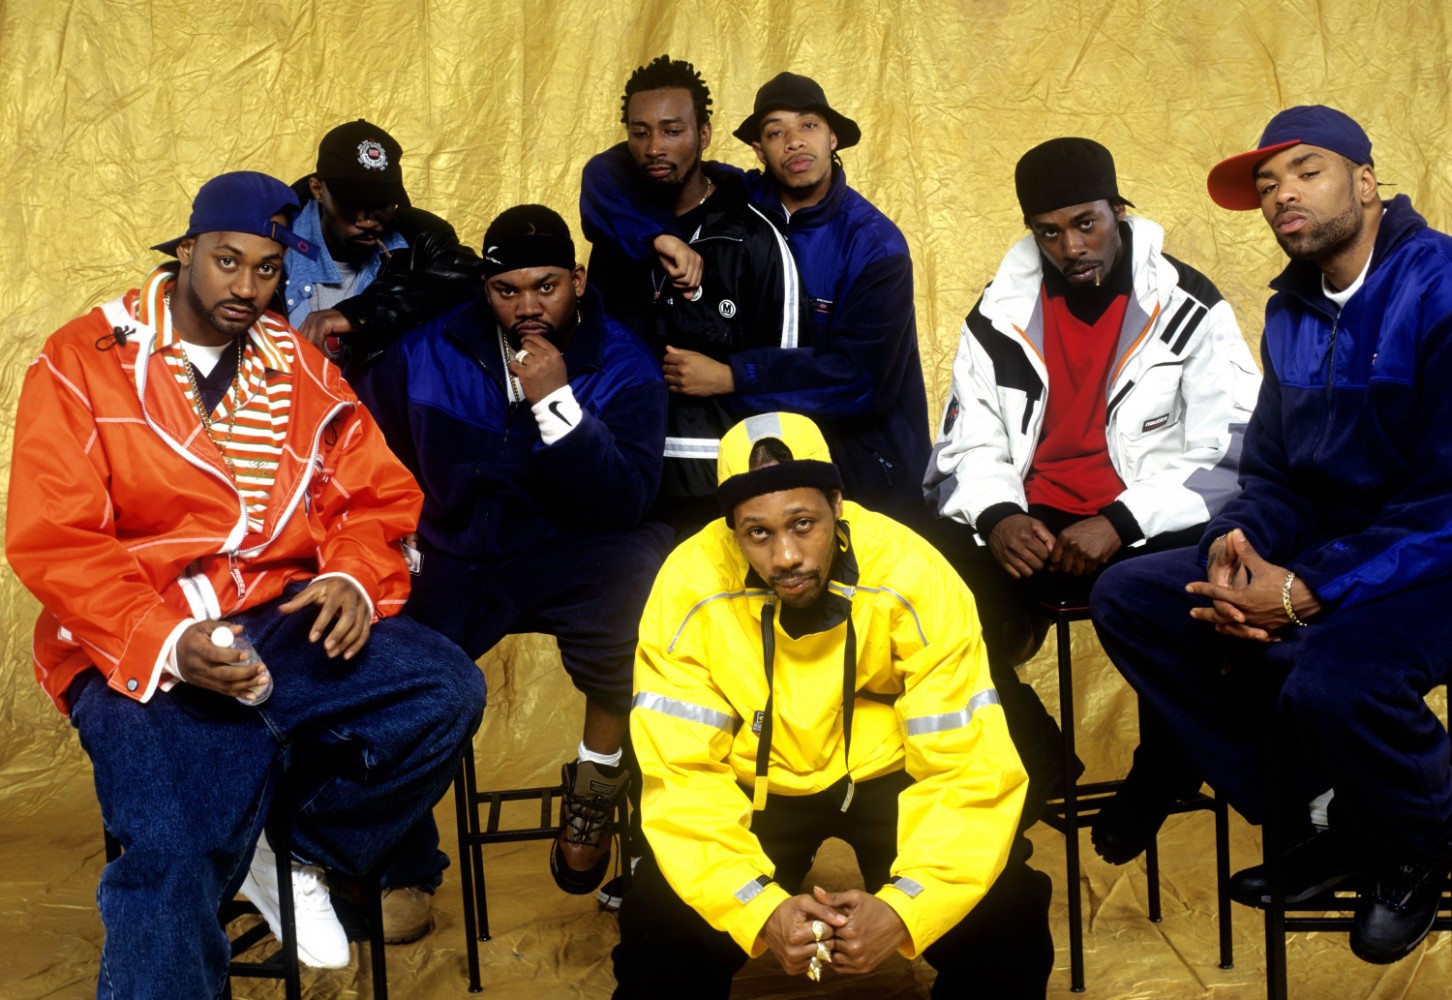 Check Out The Trailer To The New Wu Tang Clan Documentary